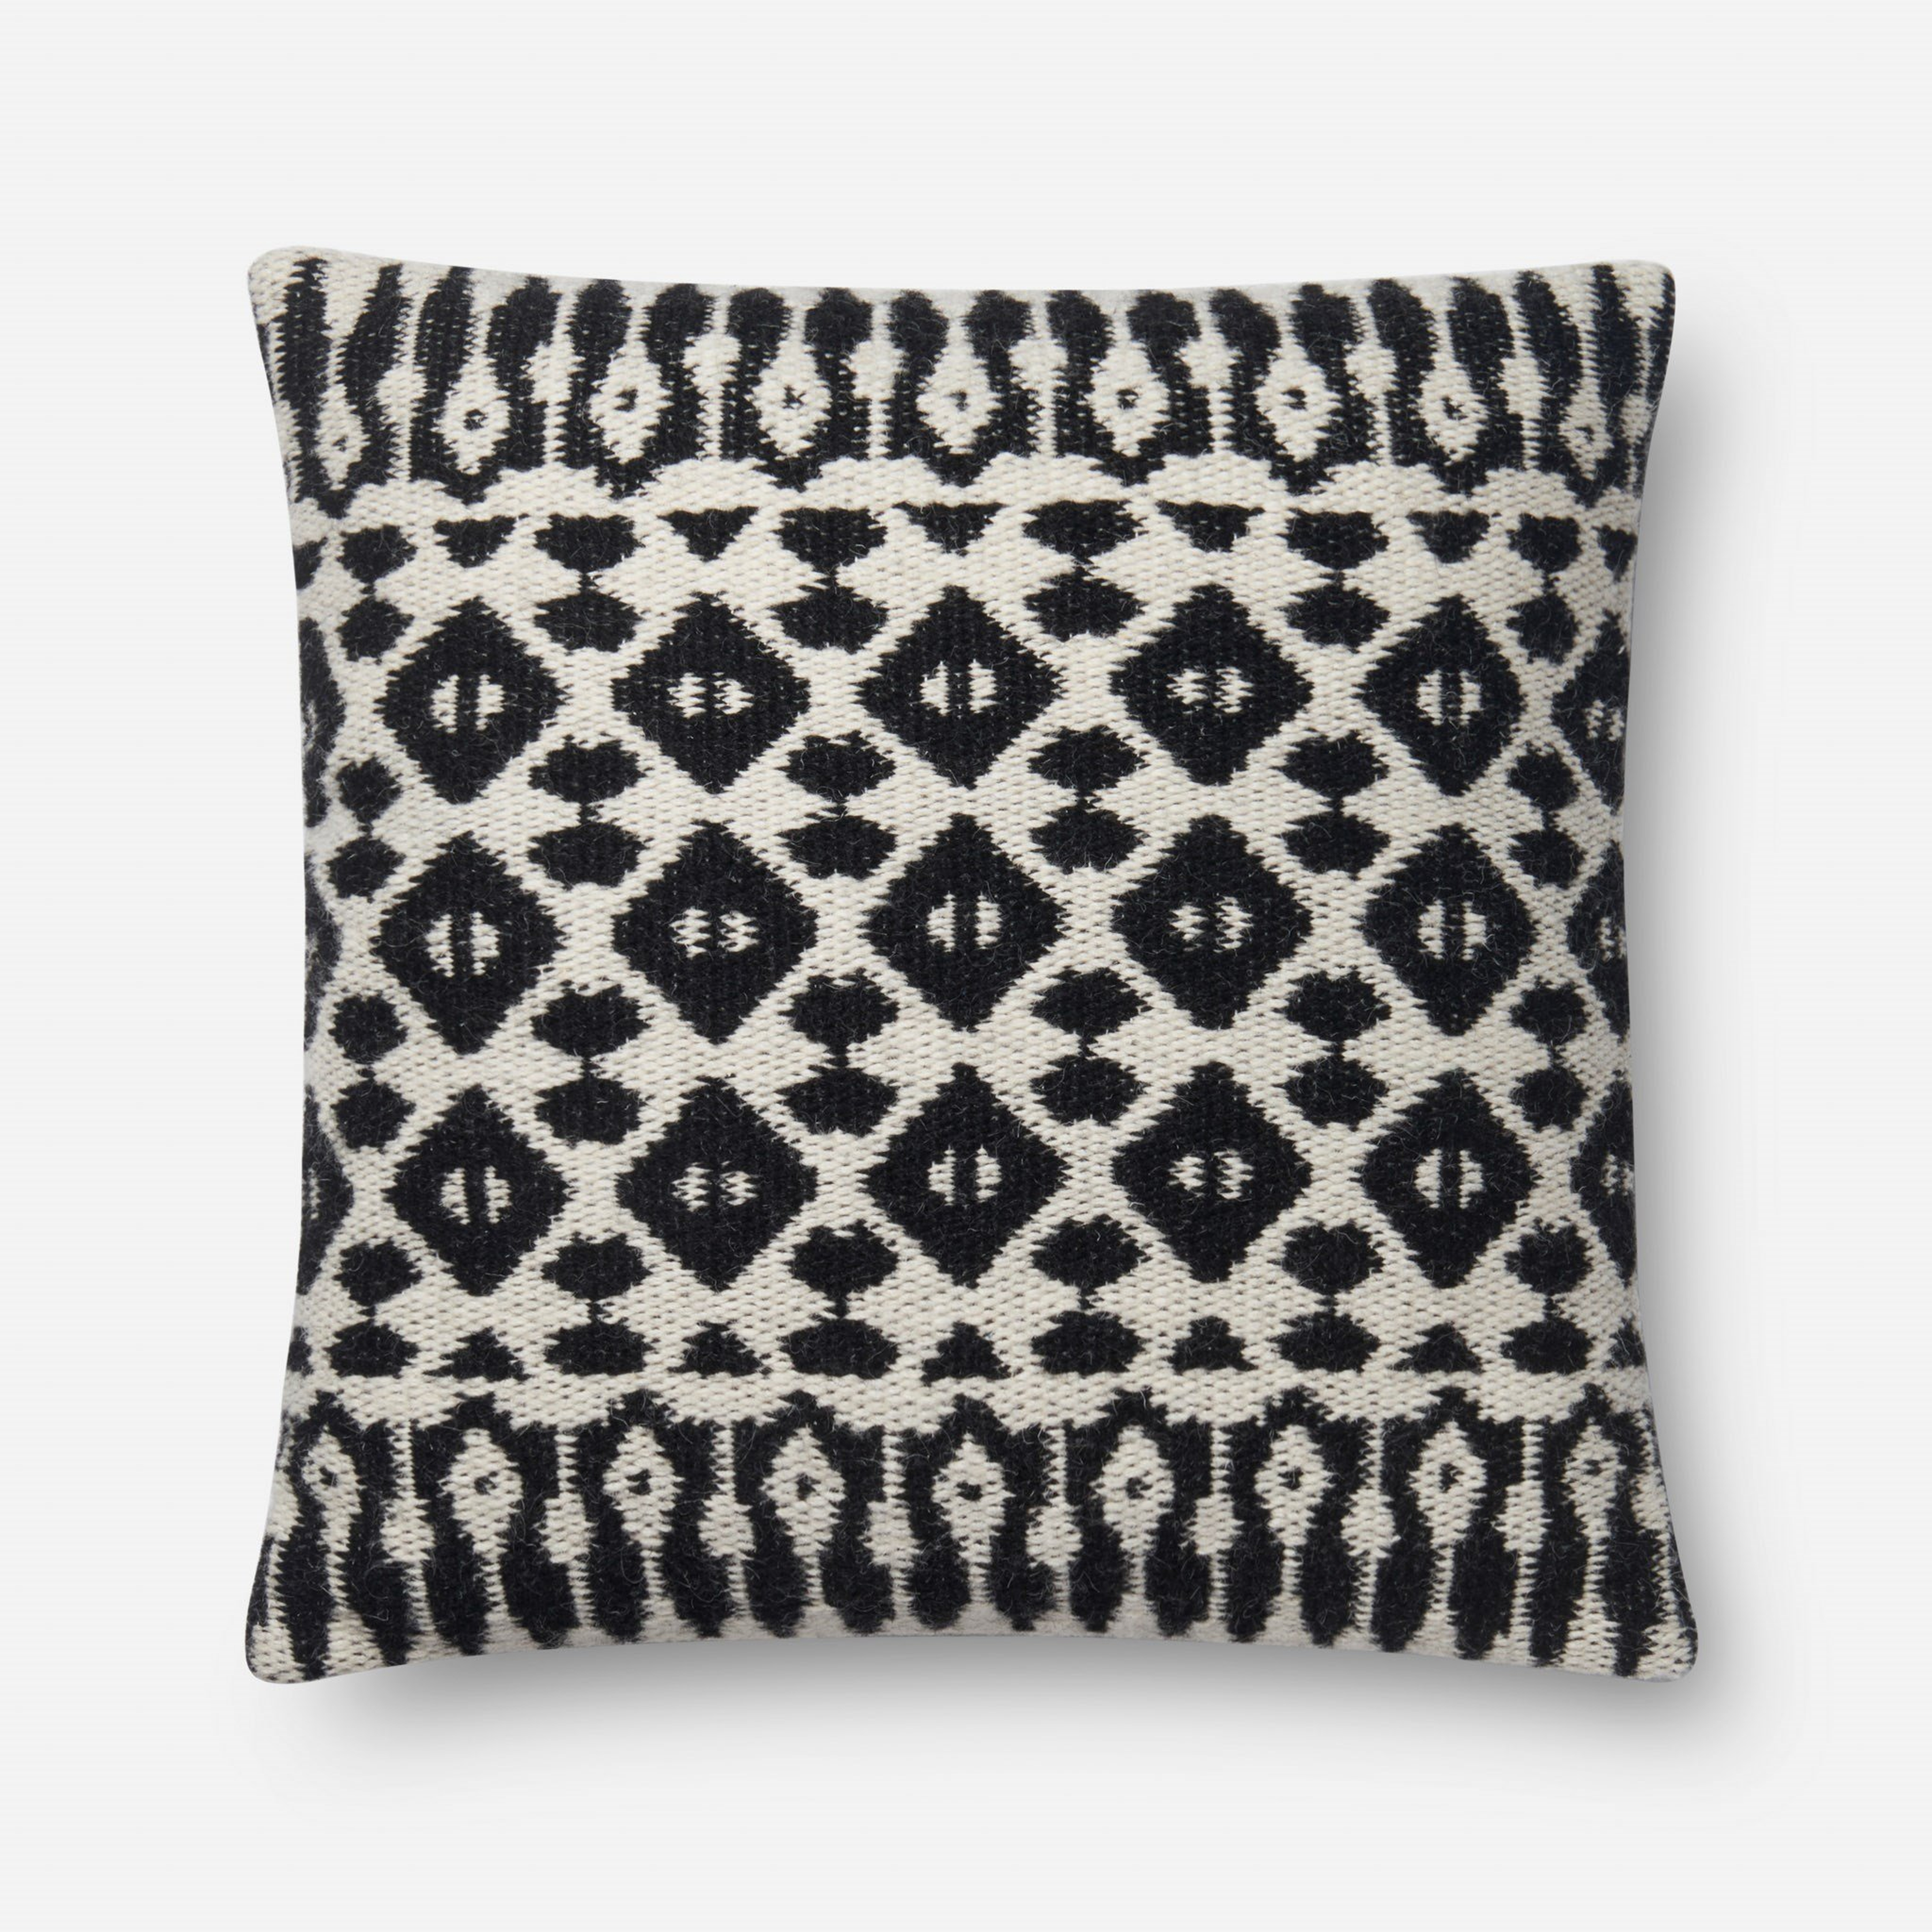 PILLOWS - BLACK / IVORY - Loloi Rugs